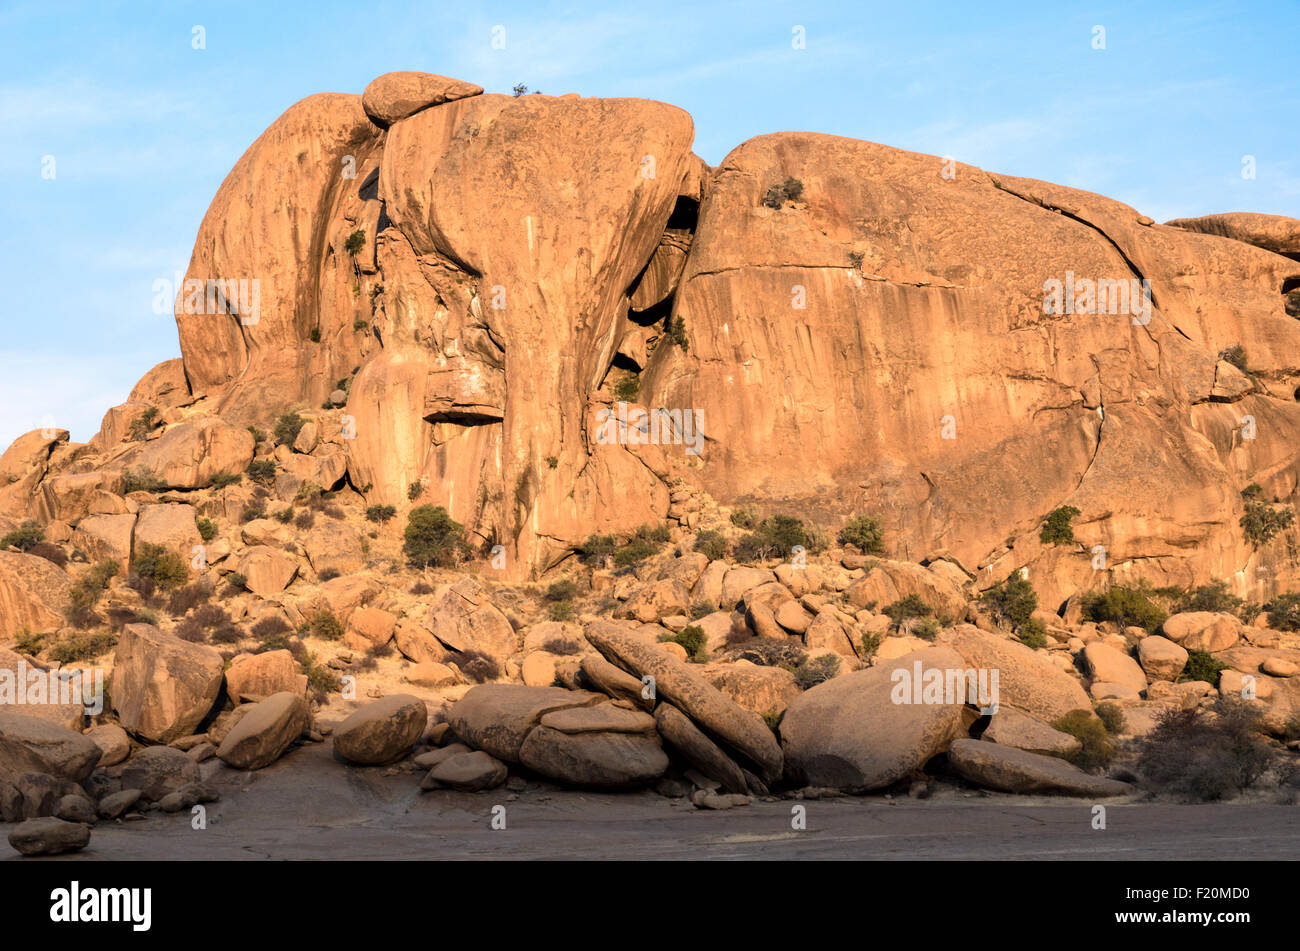 The Elephant Head Rock formations at Ameib ranch Stock Photo